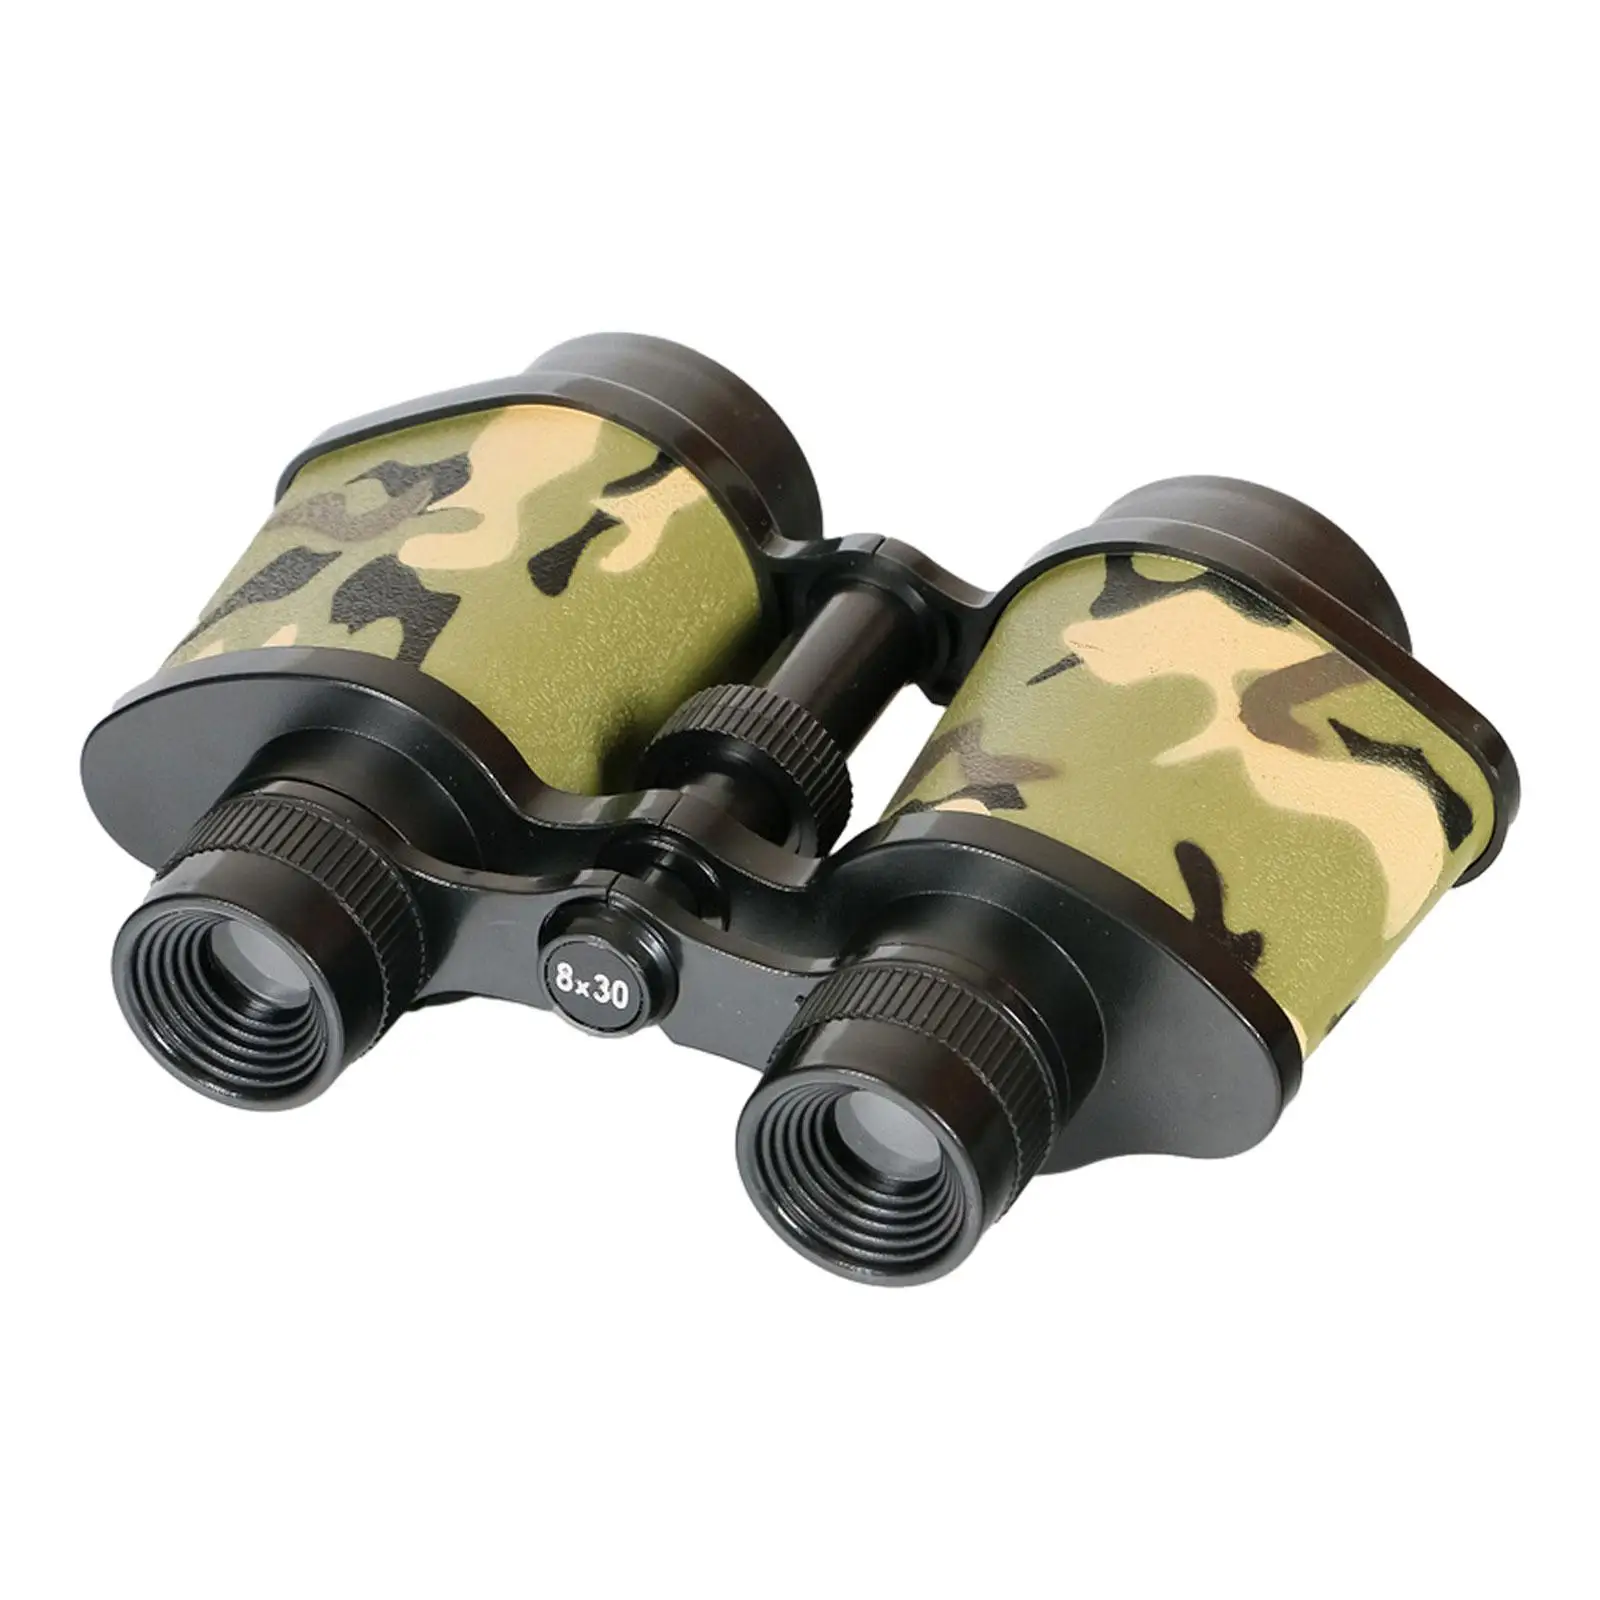 Kids Binoculars Toy 8x30 Shockproof with Neck Lanyard Jungle Binoculars Toy for Sciences Detective Presents Party Camping Favors